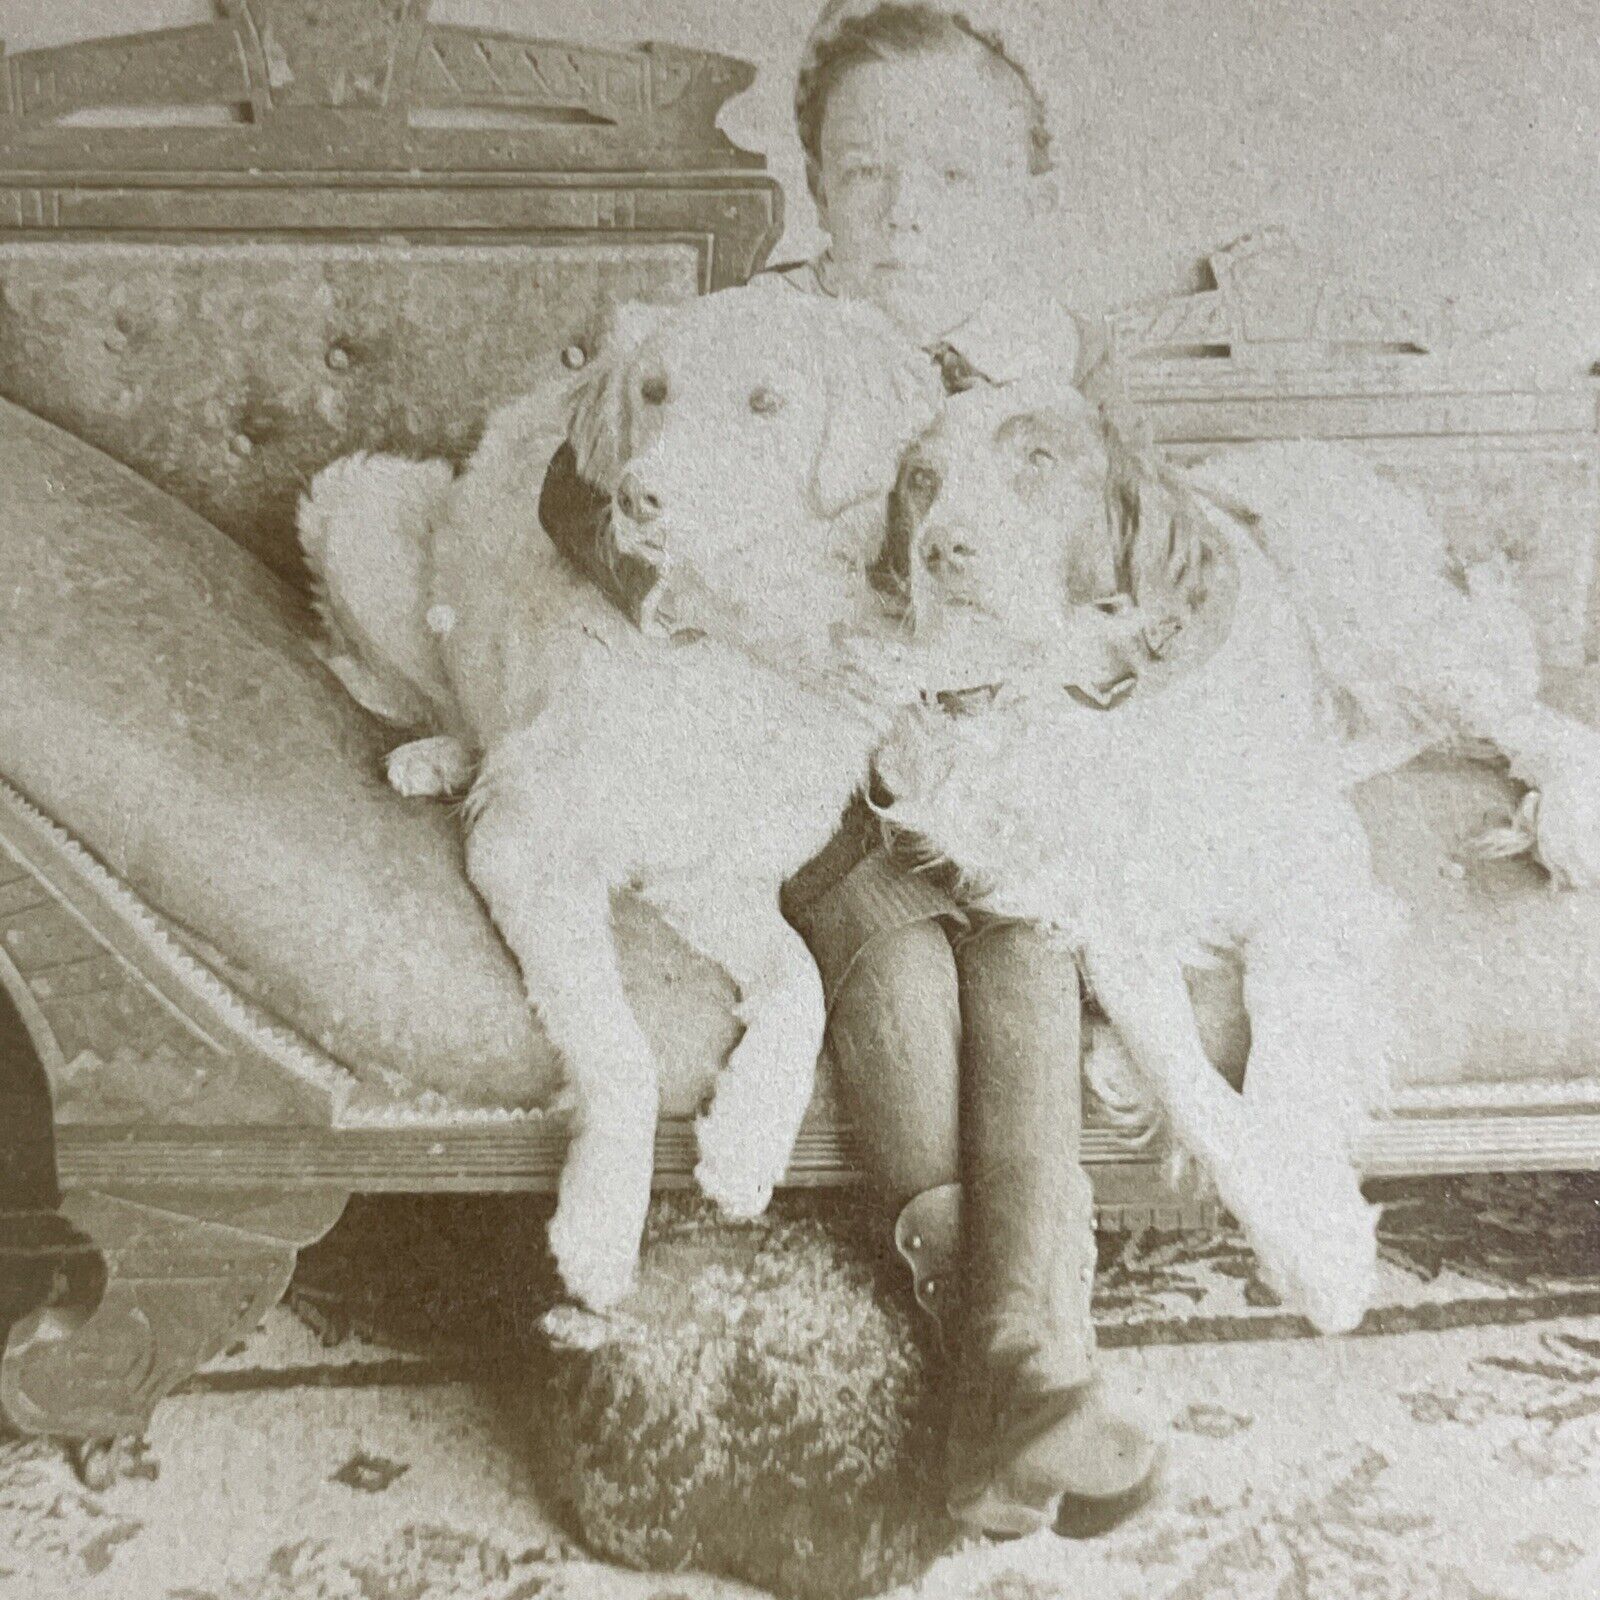 Antique 1891 Boy Hugs His Two Dogs On Couch Stereoview Photo Card P4634